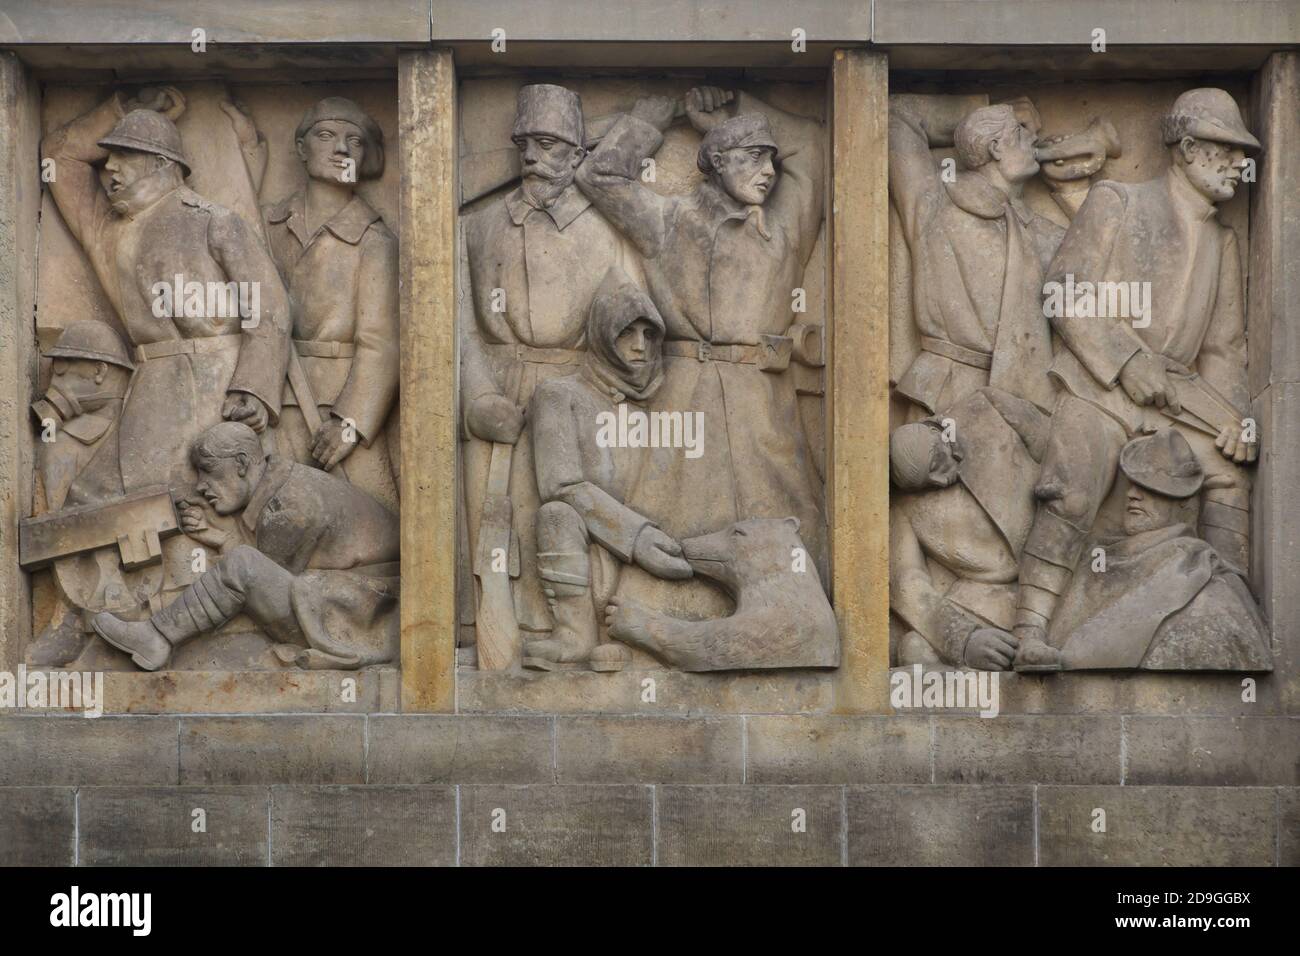 Czechoslovak Legionaries fighting during the First World War depicted in the sandstone relief by Czech sculptor Jan Vávra on the Masaryk's Tower of Independence (Masarykova věž samostatnosti) in Hořice in Eastern Bohemia, Czech Republic. The tower designed by Czech architect František Blažek (1925) was never completed. Czechoslovak Legionaries in France, in Siberia (Russia) and in Italy are depicted from left to right. Stock Photo